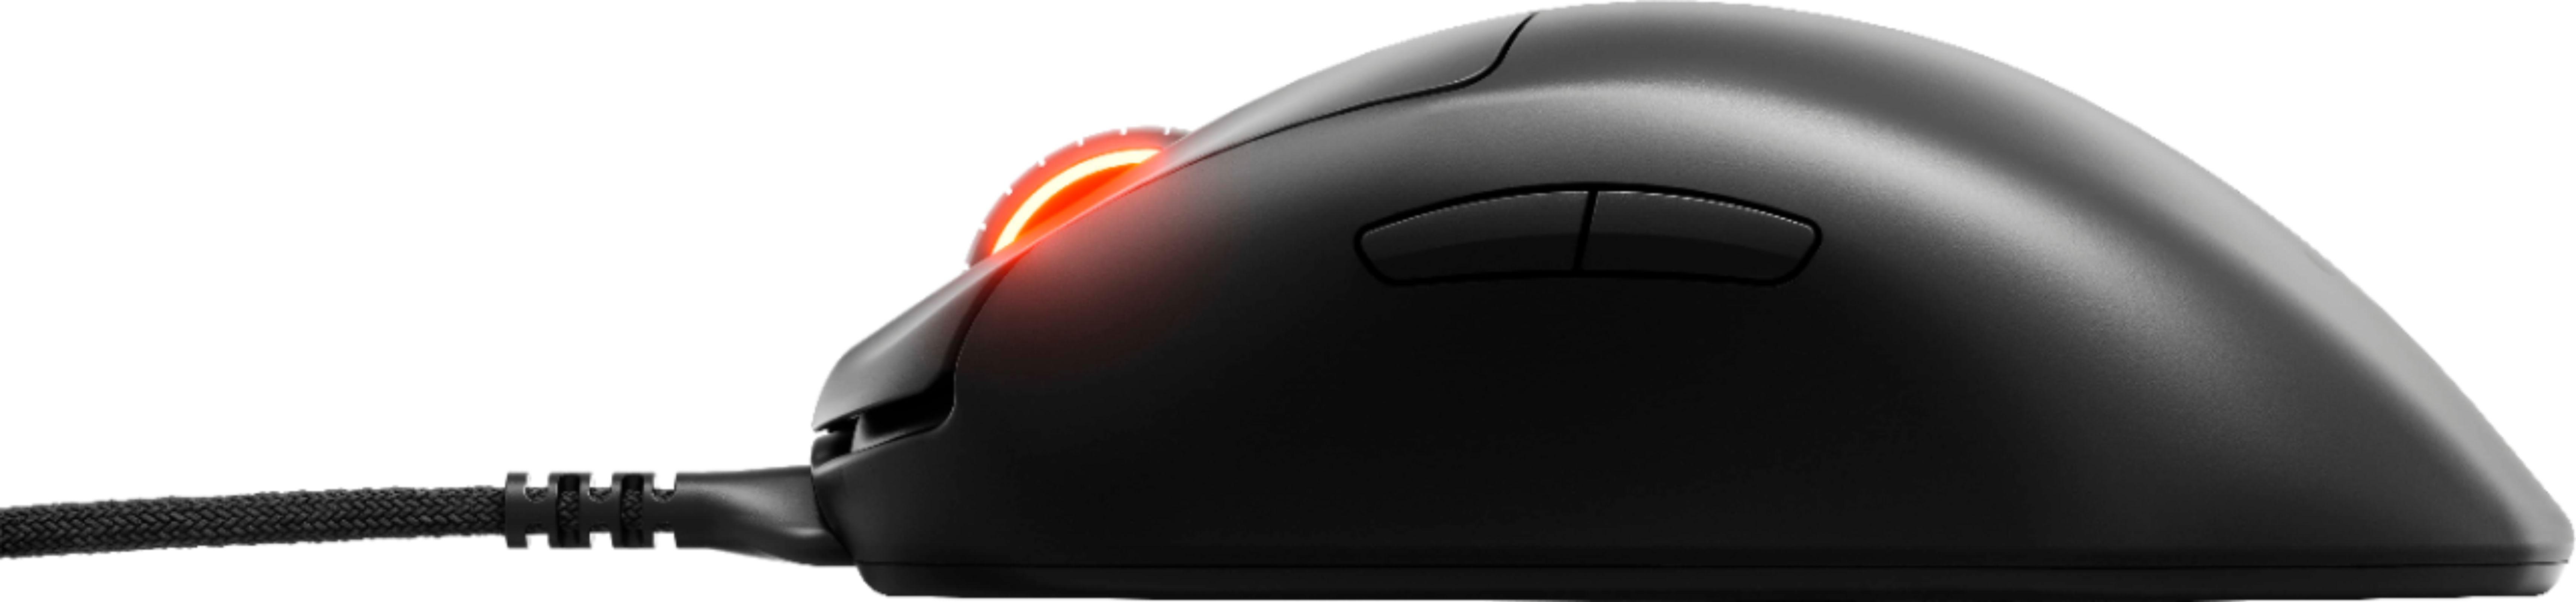 Left View: SteelSeries - Prime Lightweight Wireless Optical Gaming Mouse with RGB Lighting - Black